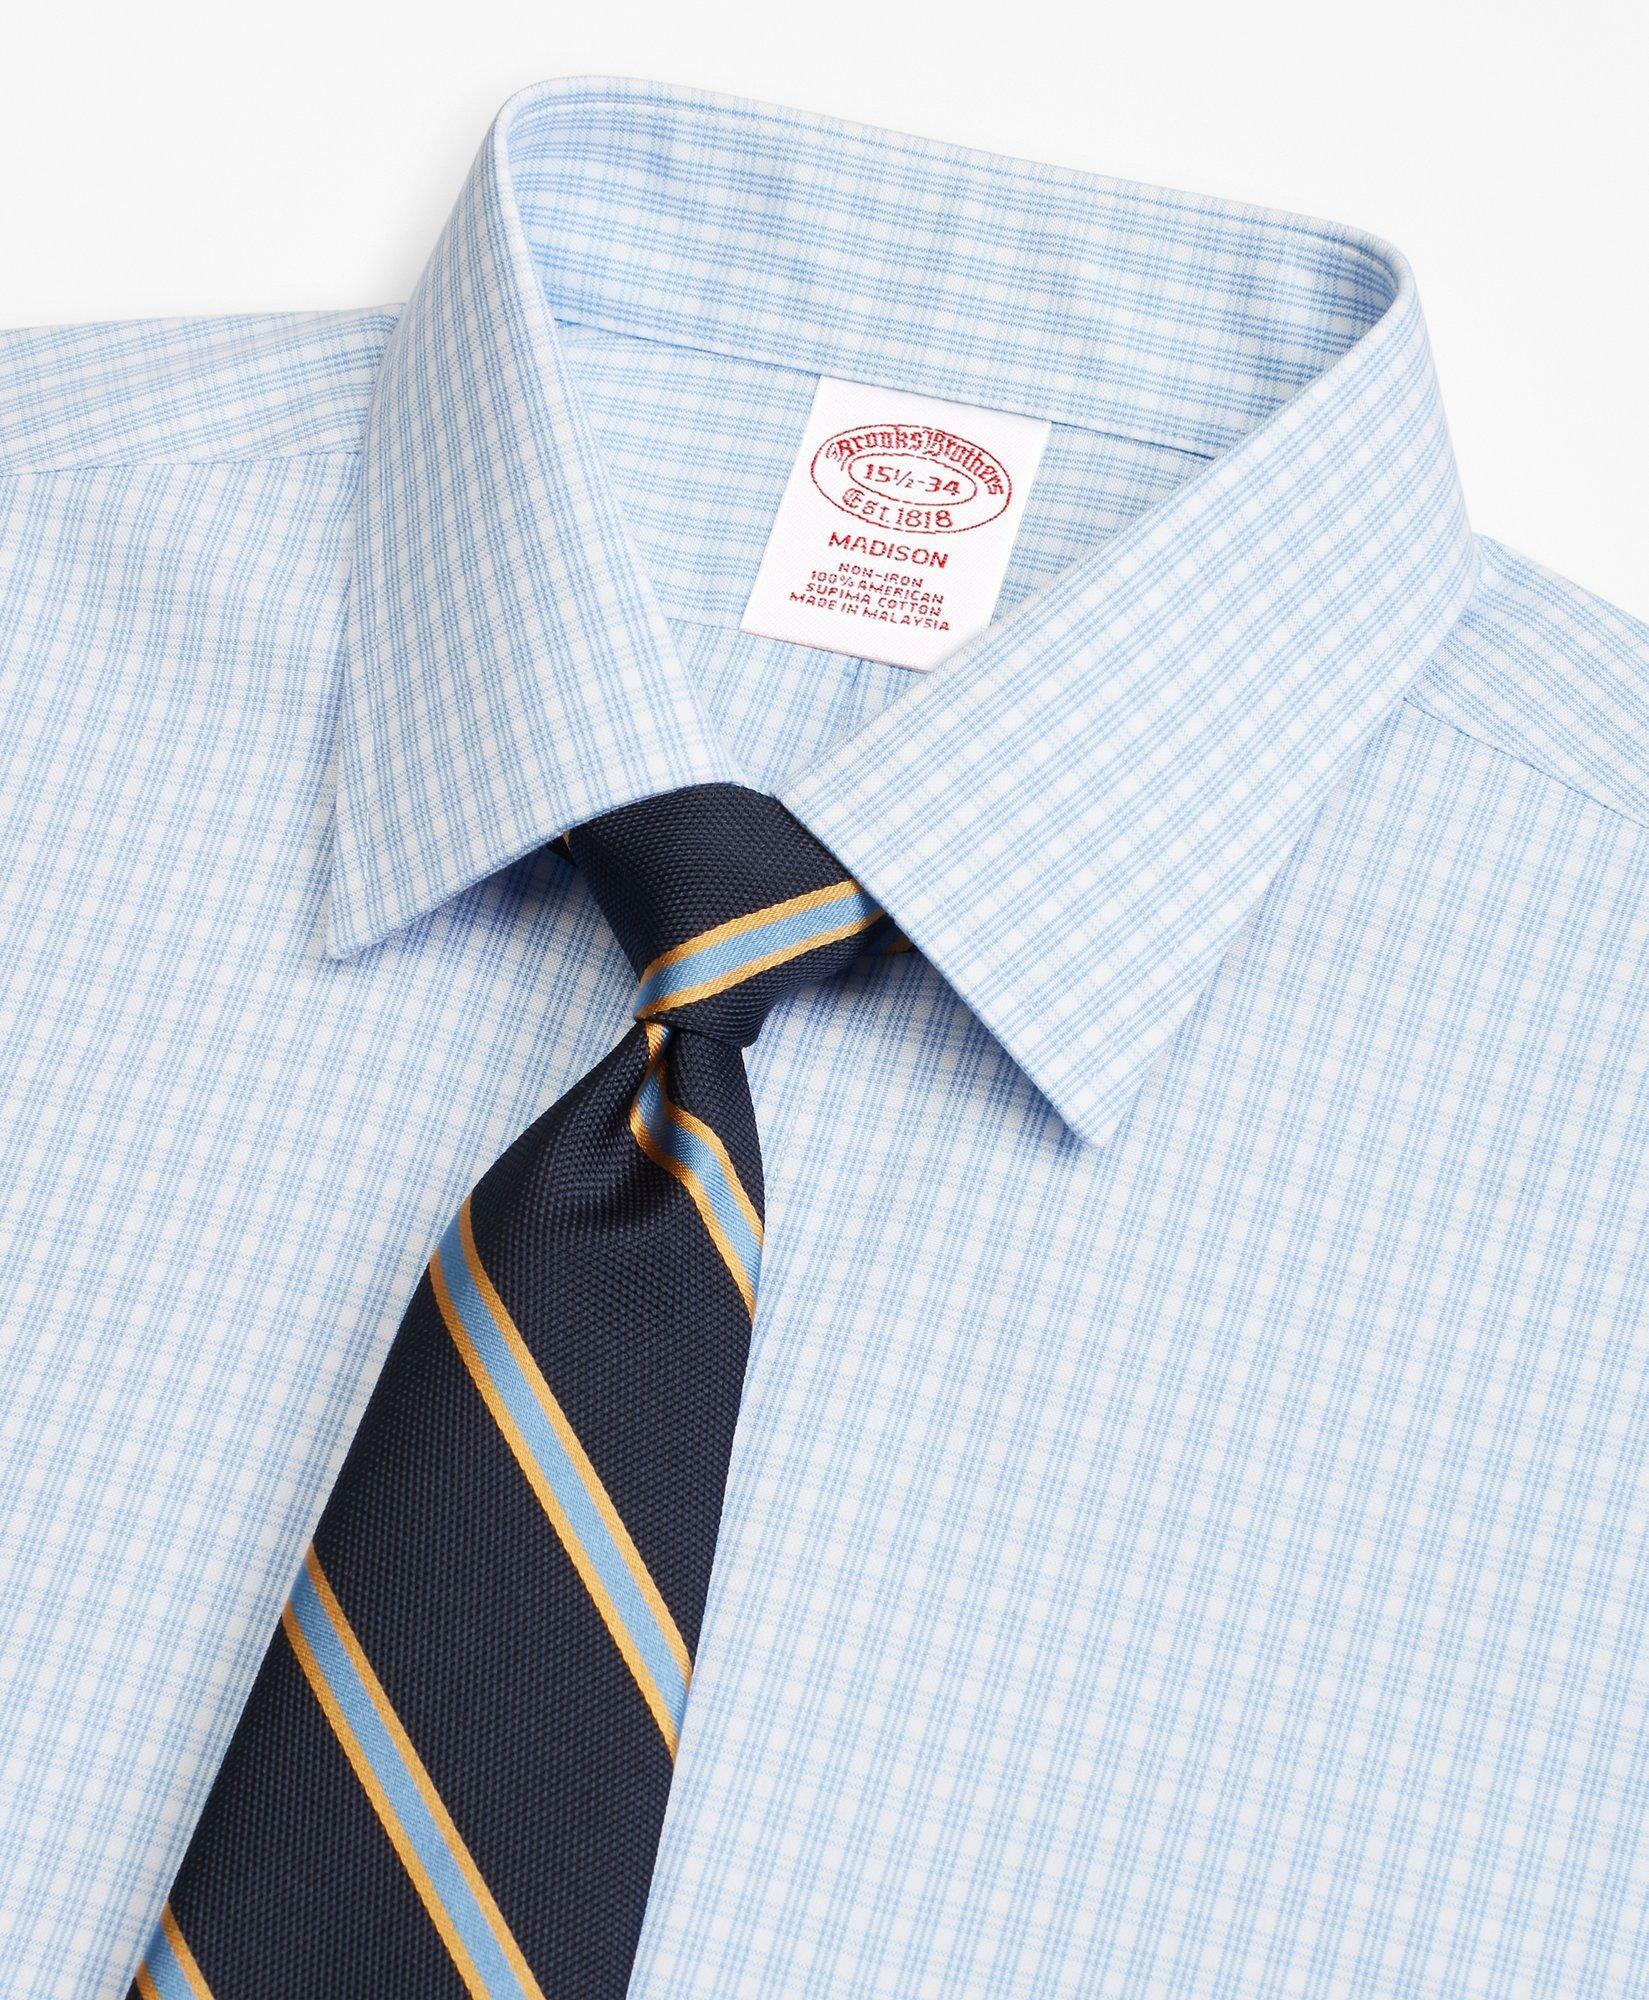 Brooks Brothers Men's Madison Relaxed-Fit Dress Shirt, Non-Iron Triple Check | Light Blue